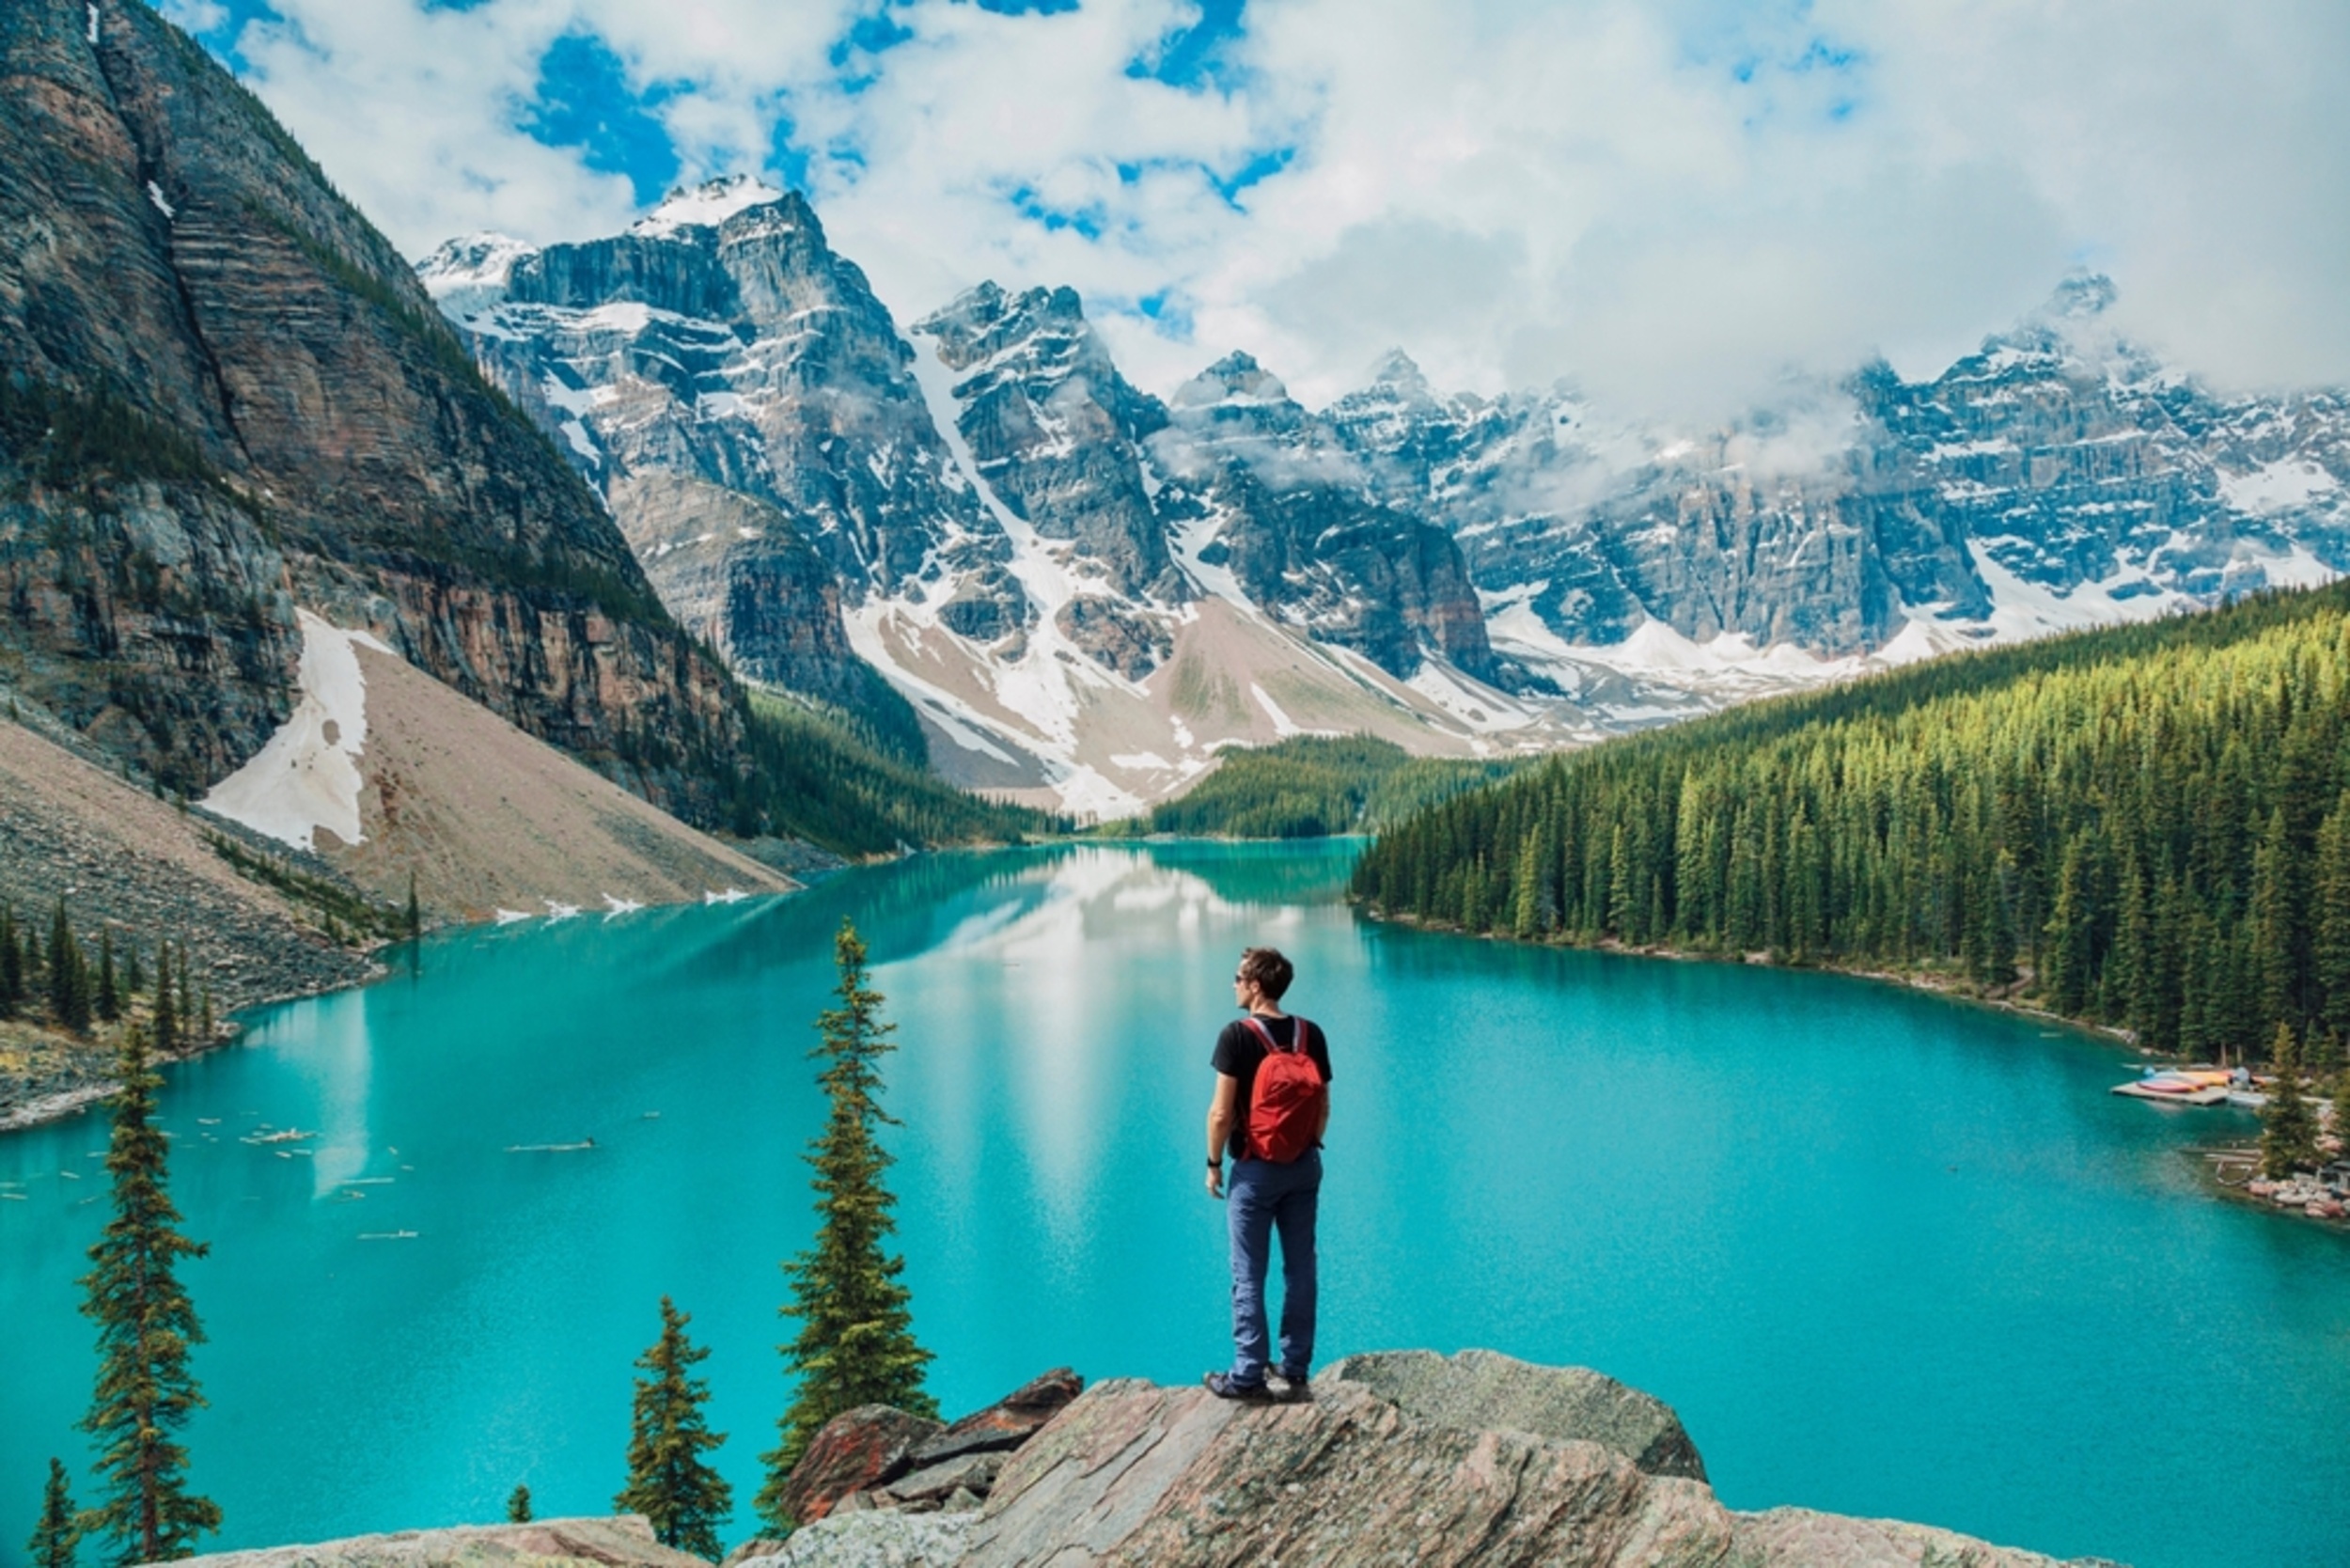 <p>Located in Alberta, Canada, Banff National Park is one of the best places to explore the majesty of the Canadian Rockies. Expect massive peaks, gorgeous glacial lakes, and plenty of wildlife. </p><p>You may also like: <a href='https://www.yardbarker.com/lifestyle/articles/22_recipes_that_put_spins_on_classic_thanksgiving_dishes_111623/s1__39468490'>22 recipes that put spins on classic Thanksgiving dishes</a></p>